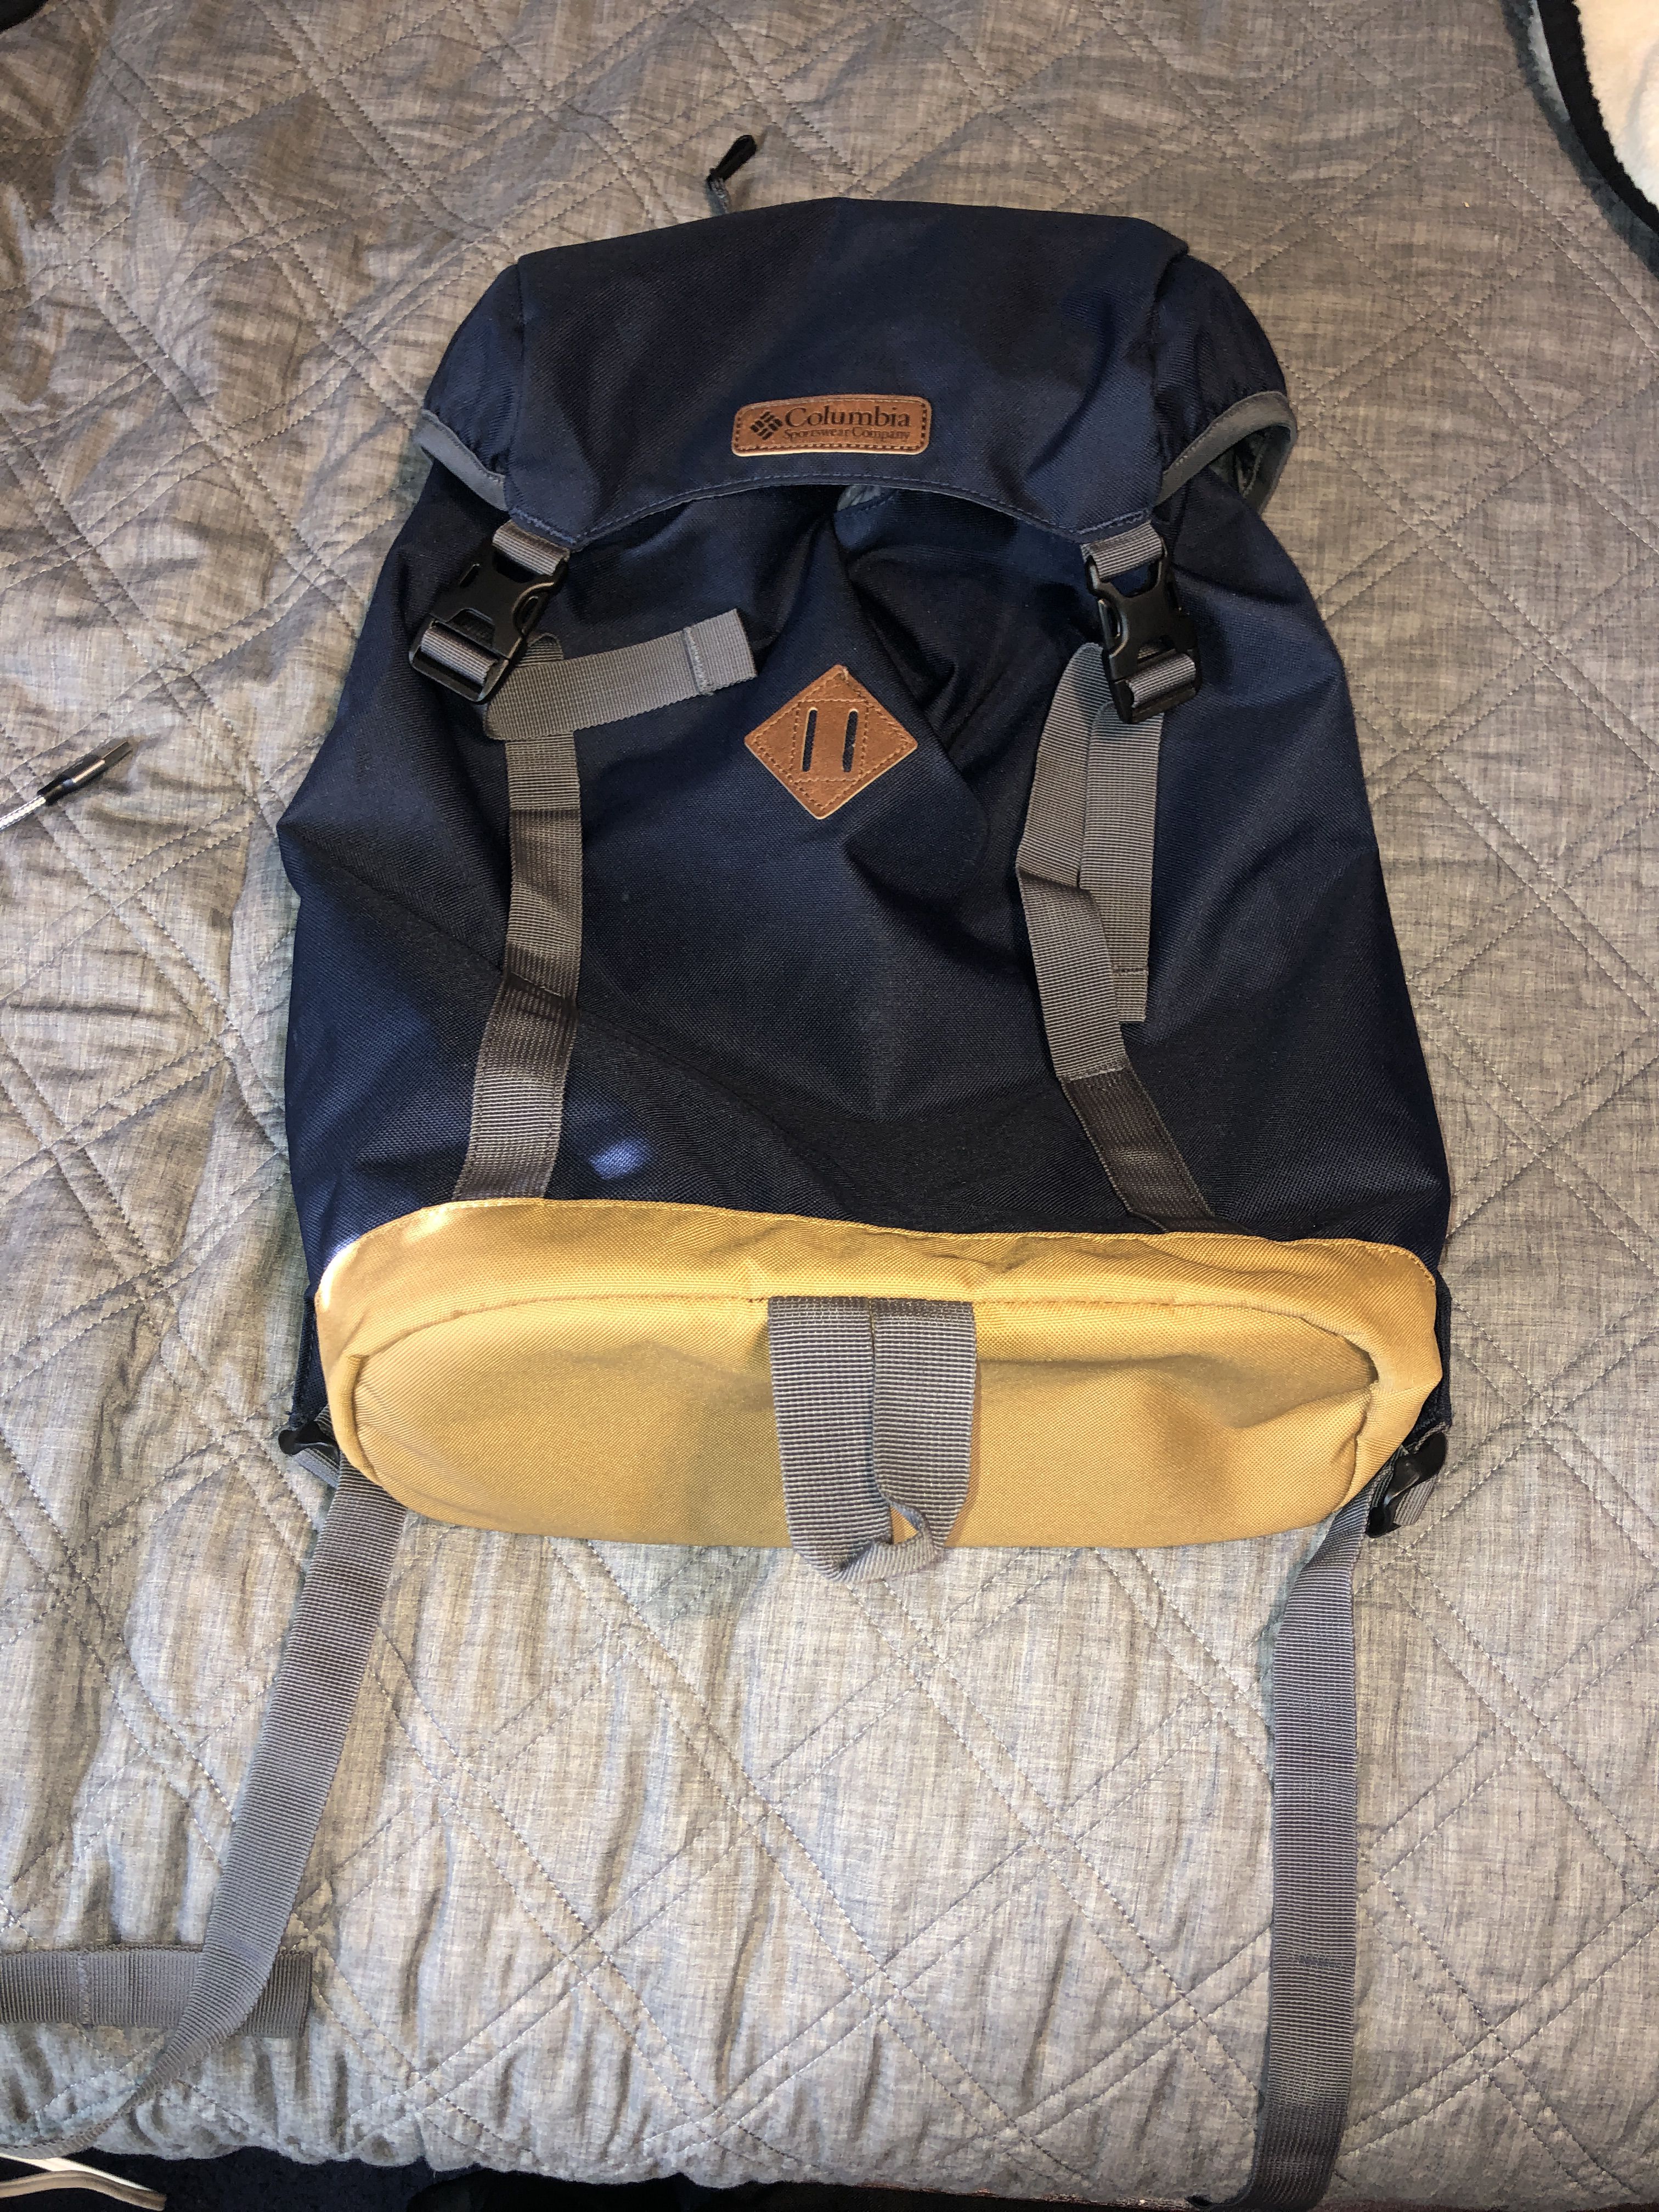 columbia brand backpack almost new navy blue